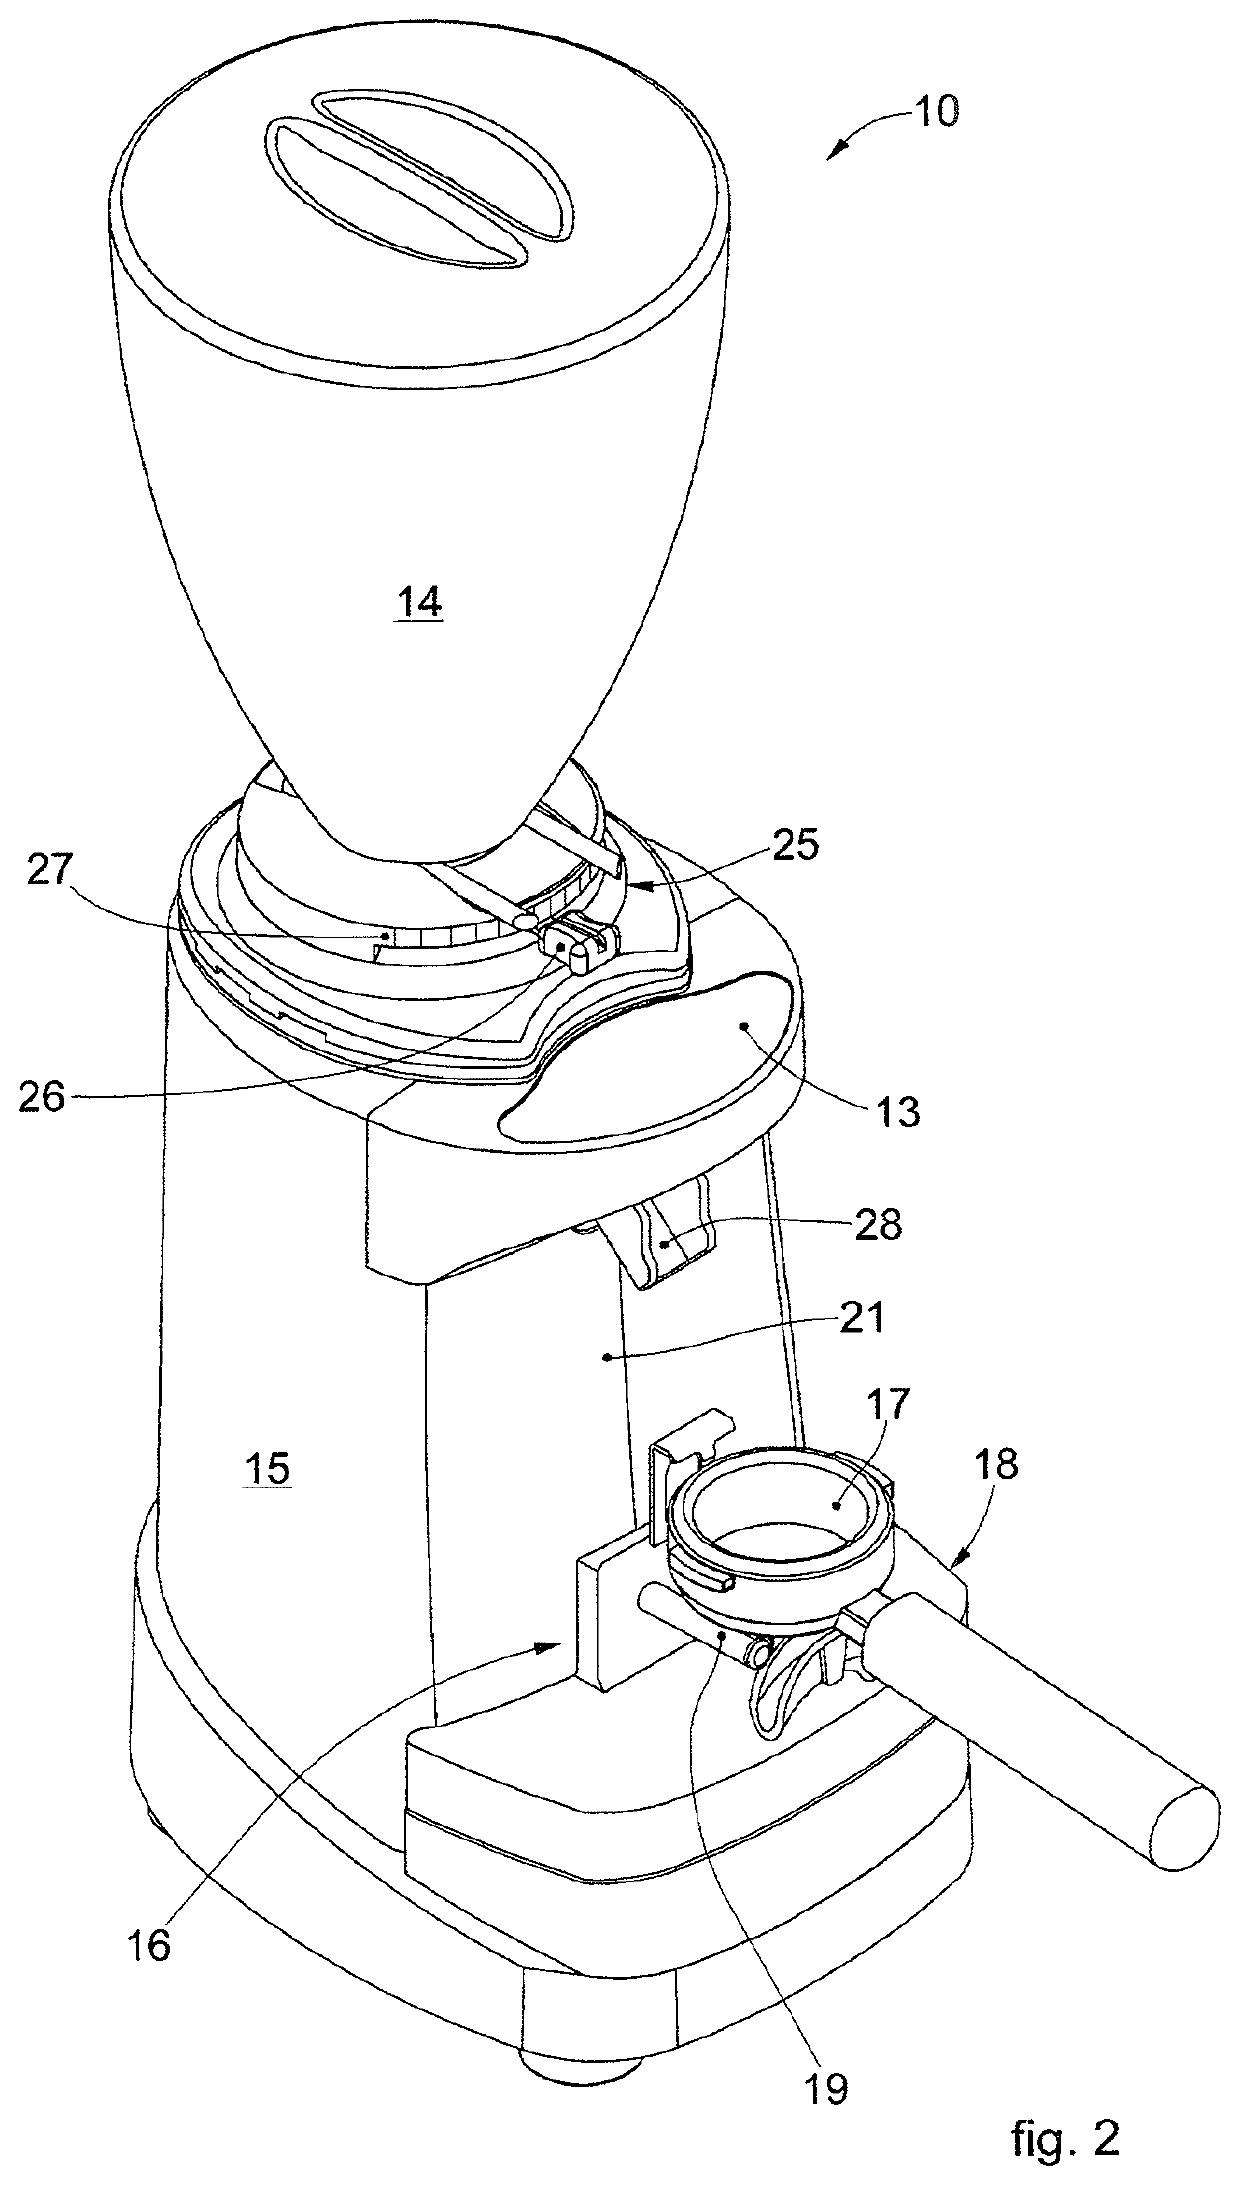 Method and apparatus to grind a product